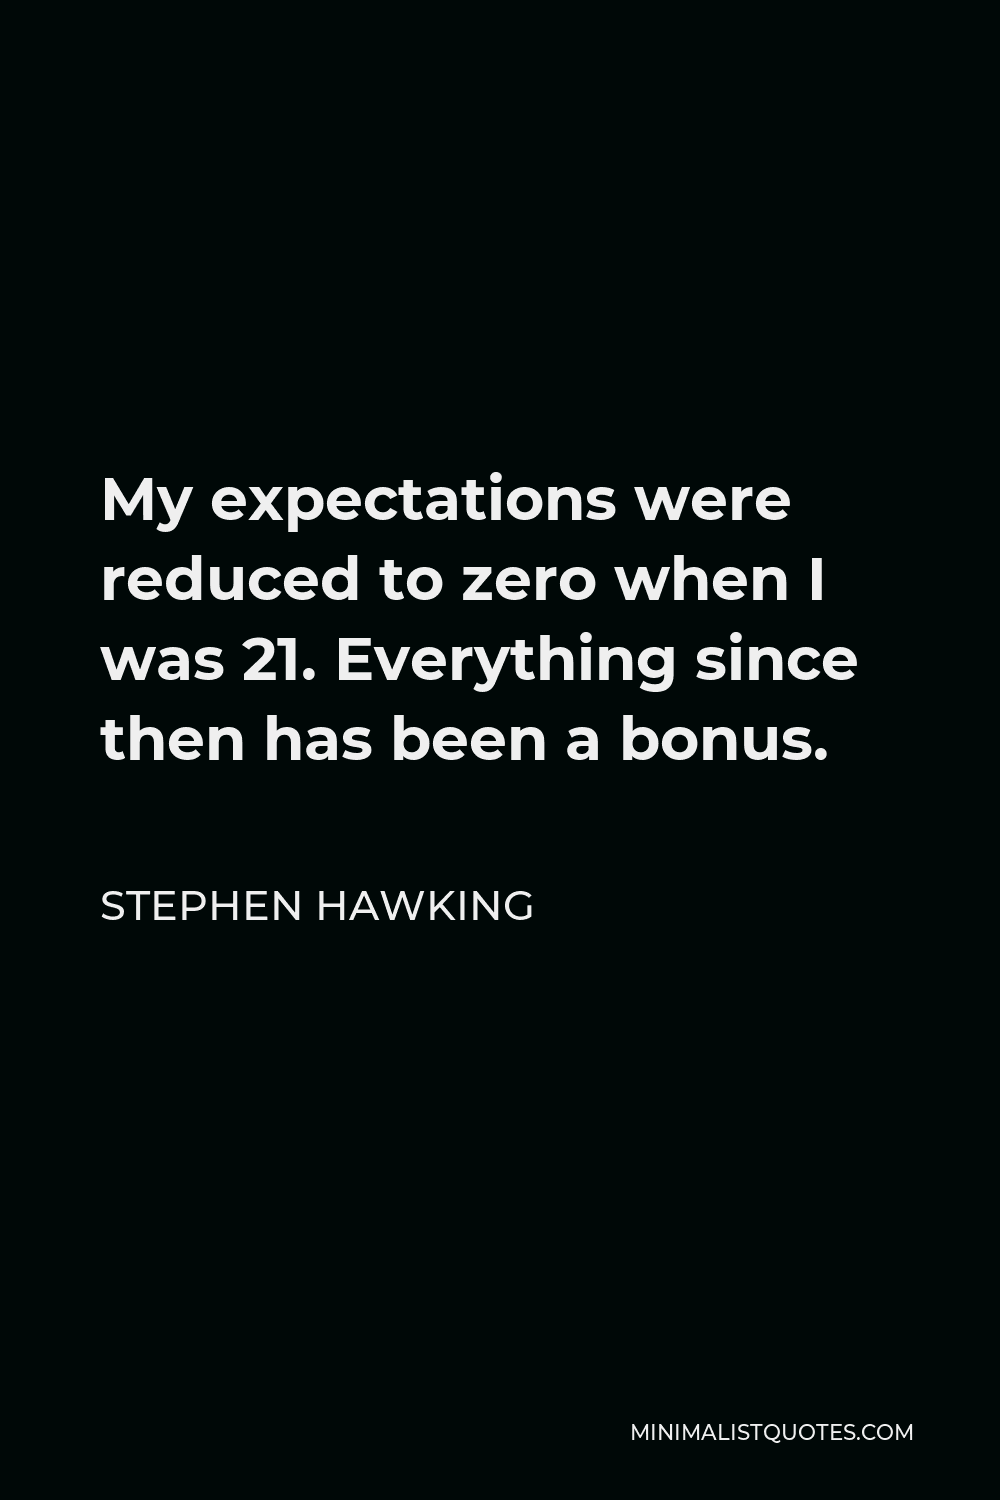 Stephen Hawking Quote - My expectations were reduced to zero when I was 21. Everything since then has been a bonus.